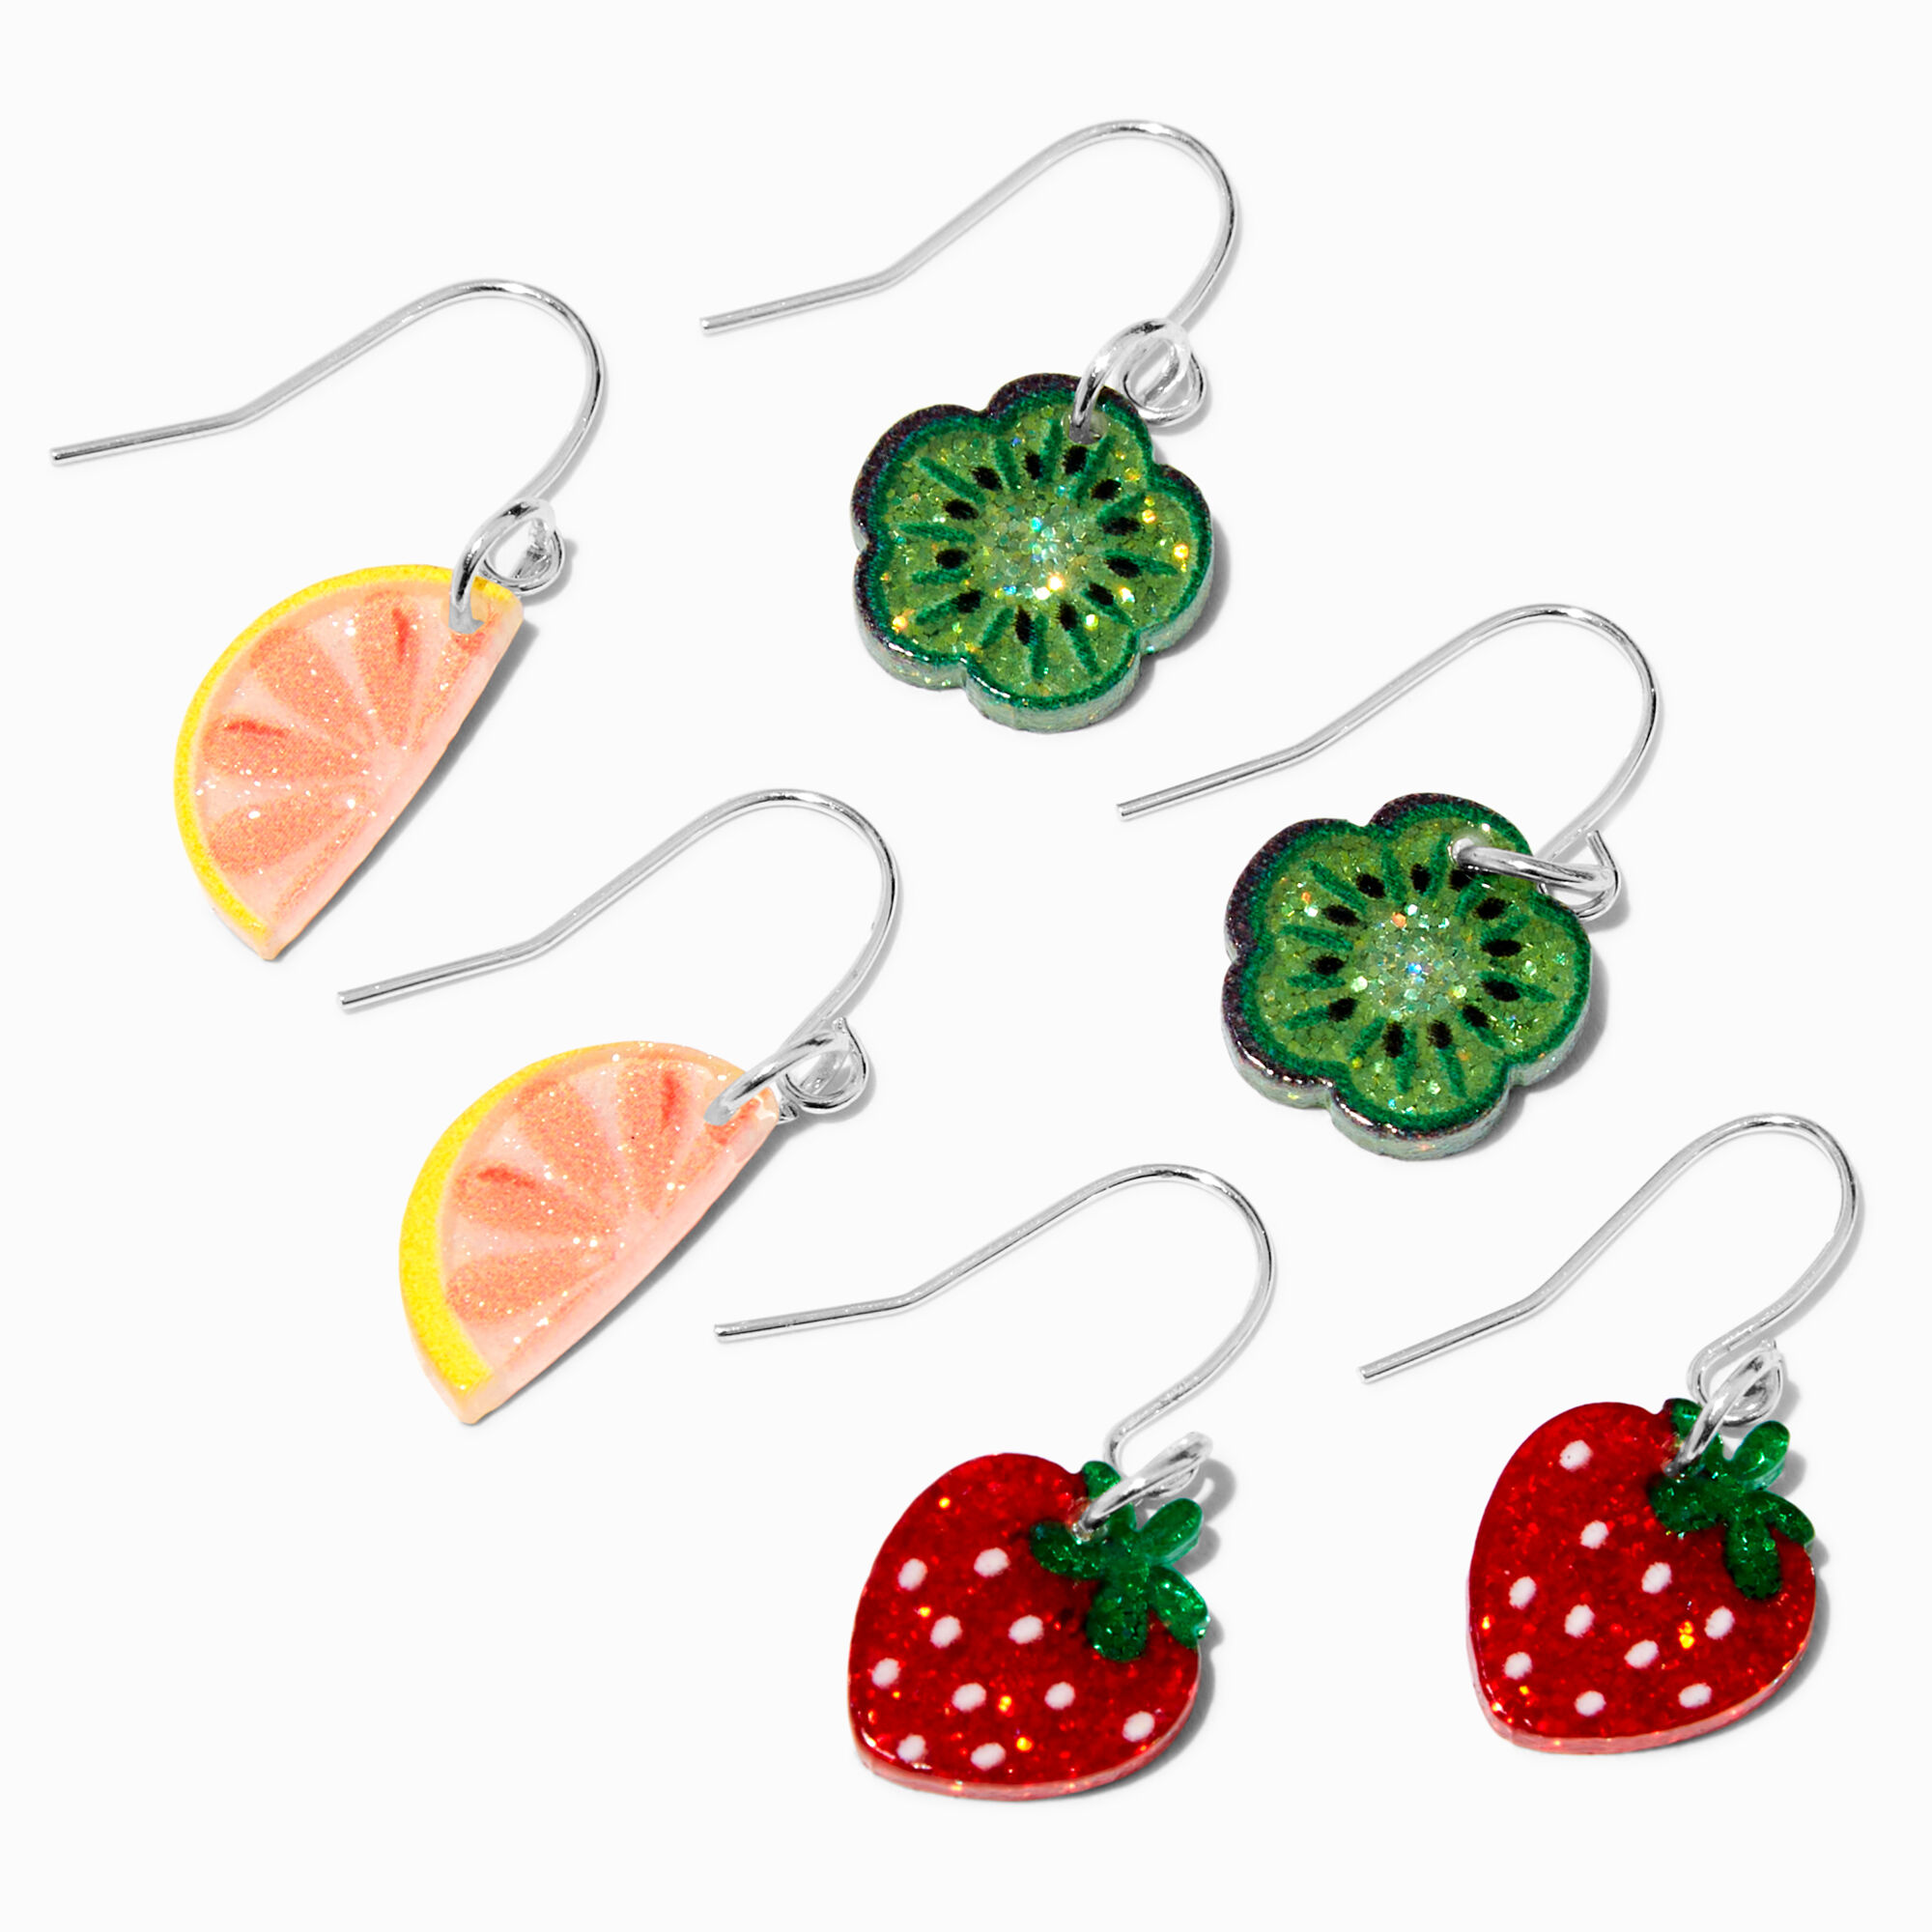 View Claires Acrylic Fruit 05 Drop Earrings 3 Pack Silver information